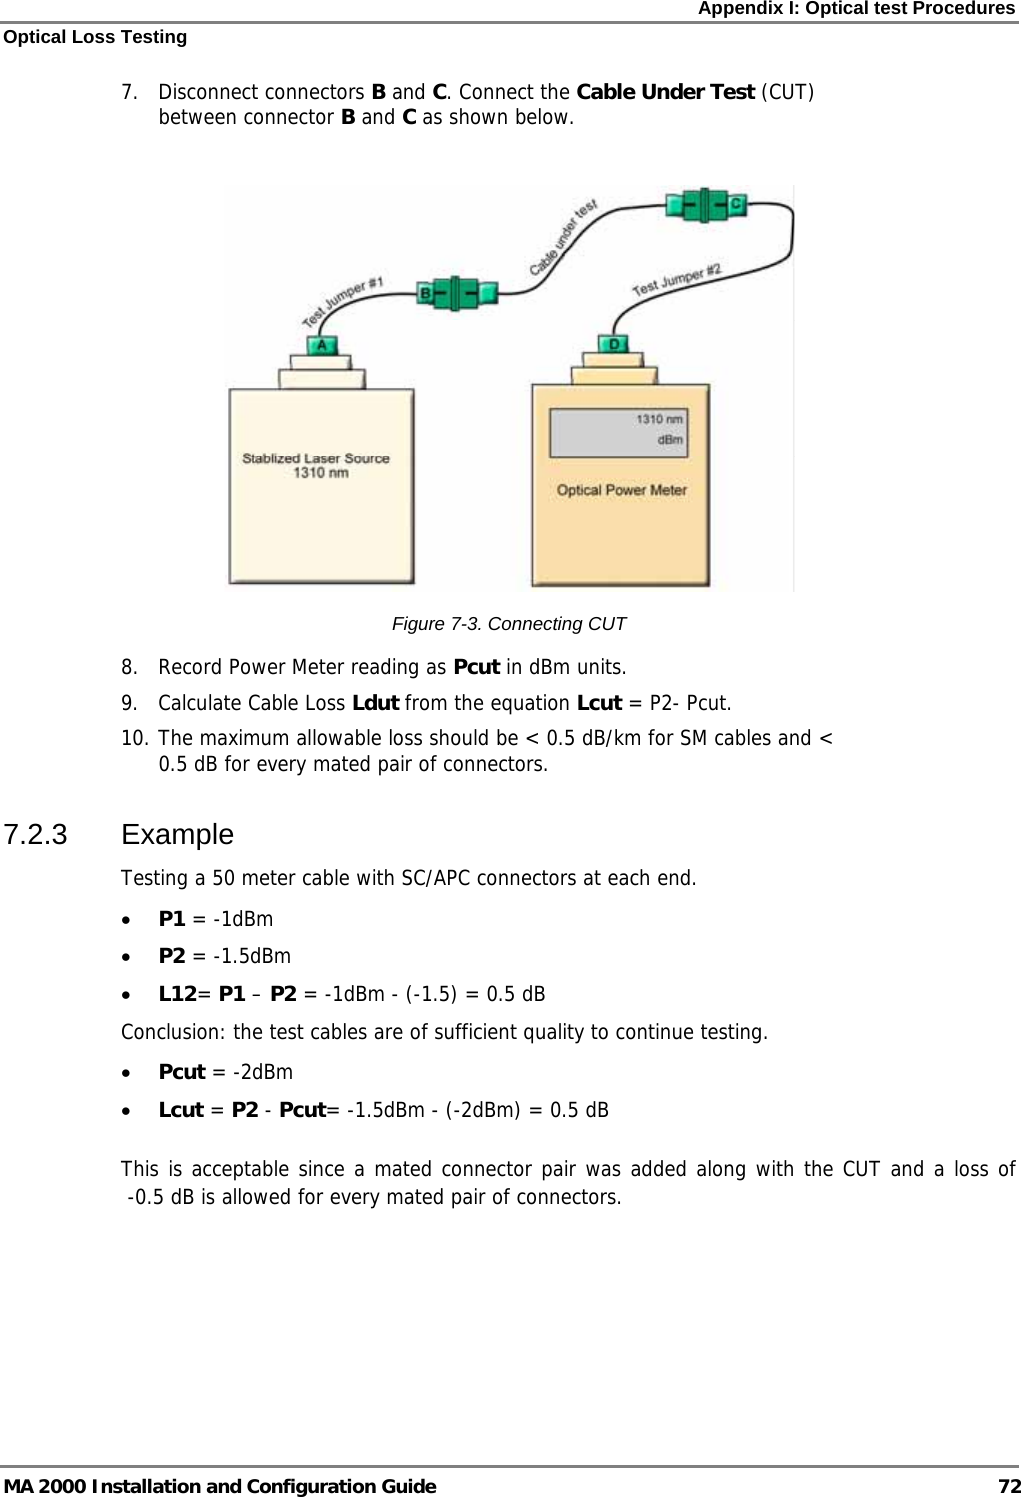 Appendix I: Optical test Procedures Optical Loss Testing MA 2000 Installation and Configuration Guide  72 7. Disconnect connectors B and C. Connect the Cable Under Test (CUT) between connector B and C as shown below.   Figure  7-3. Connecting CUT 8. Record Power Meter reading as Pcut in dBm units.  9. Calculate Cable Loss Ldut from the equation Lcut = P2- Pcut.  10. The maximum allowable loss should be &lt; 0.5 dB/km for SM cables and &lt; 0.5 dB for every mated pair of connectors. 7.2.3 Example Testing a 50 meter cable with SC/APC connectors at each end. • P1 = -1dBm • P2 = -1.5dBm • L12= P1 – P2 = -1dBm - (-1.5) = 0.5 dB Conclusion: the test cables are of sufficient quality to continue testing. • Pcut = -2dBm • Lcut = P2 - Pcut= -1.5dBm - (-2dBm) = 0.5 dB  This is acceptable since a mated connector pair was added along with the CUT and a loss of   -0.5 dB is allowed for every mated pair of connectors.   